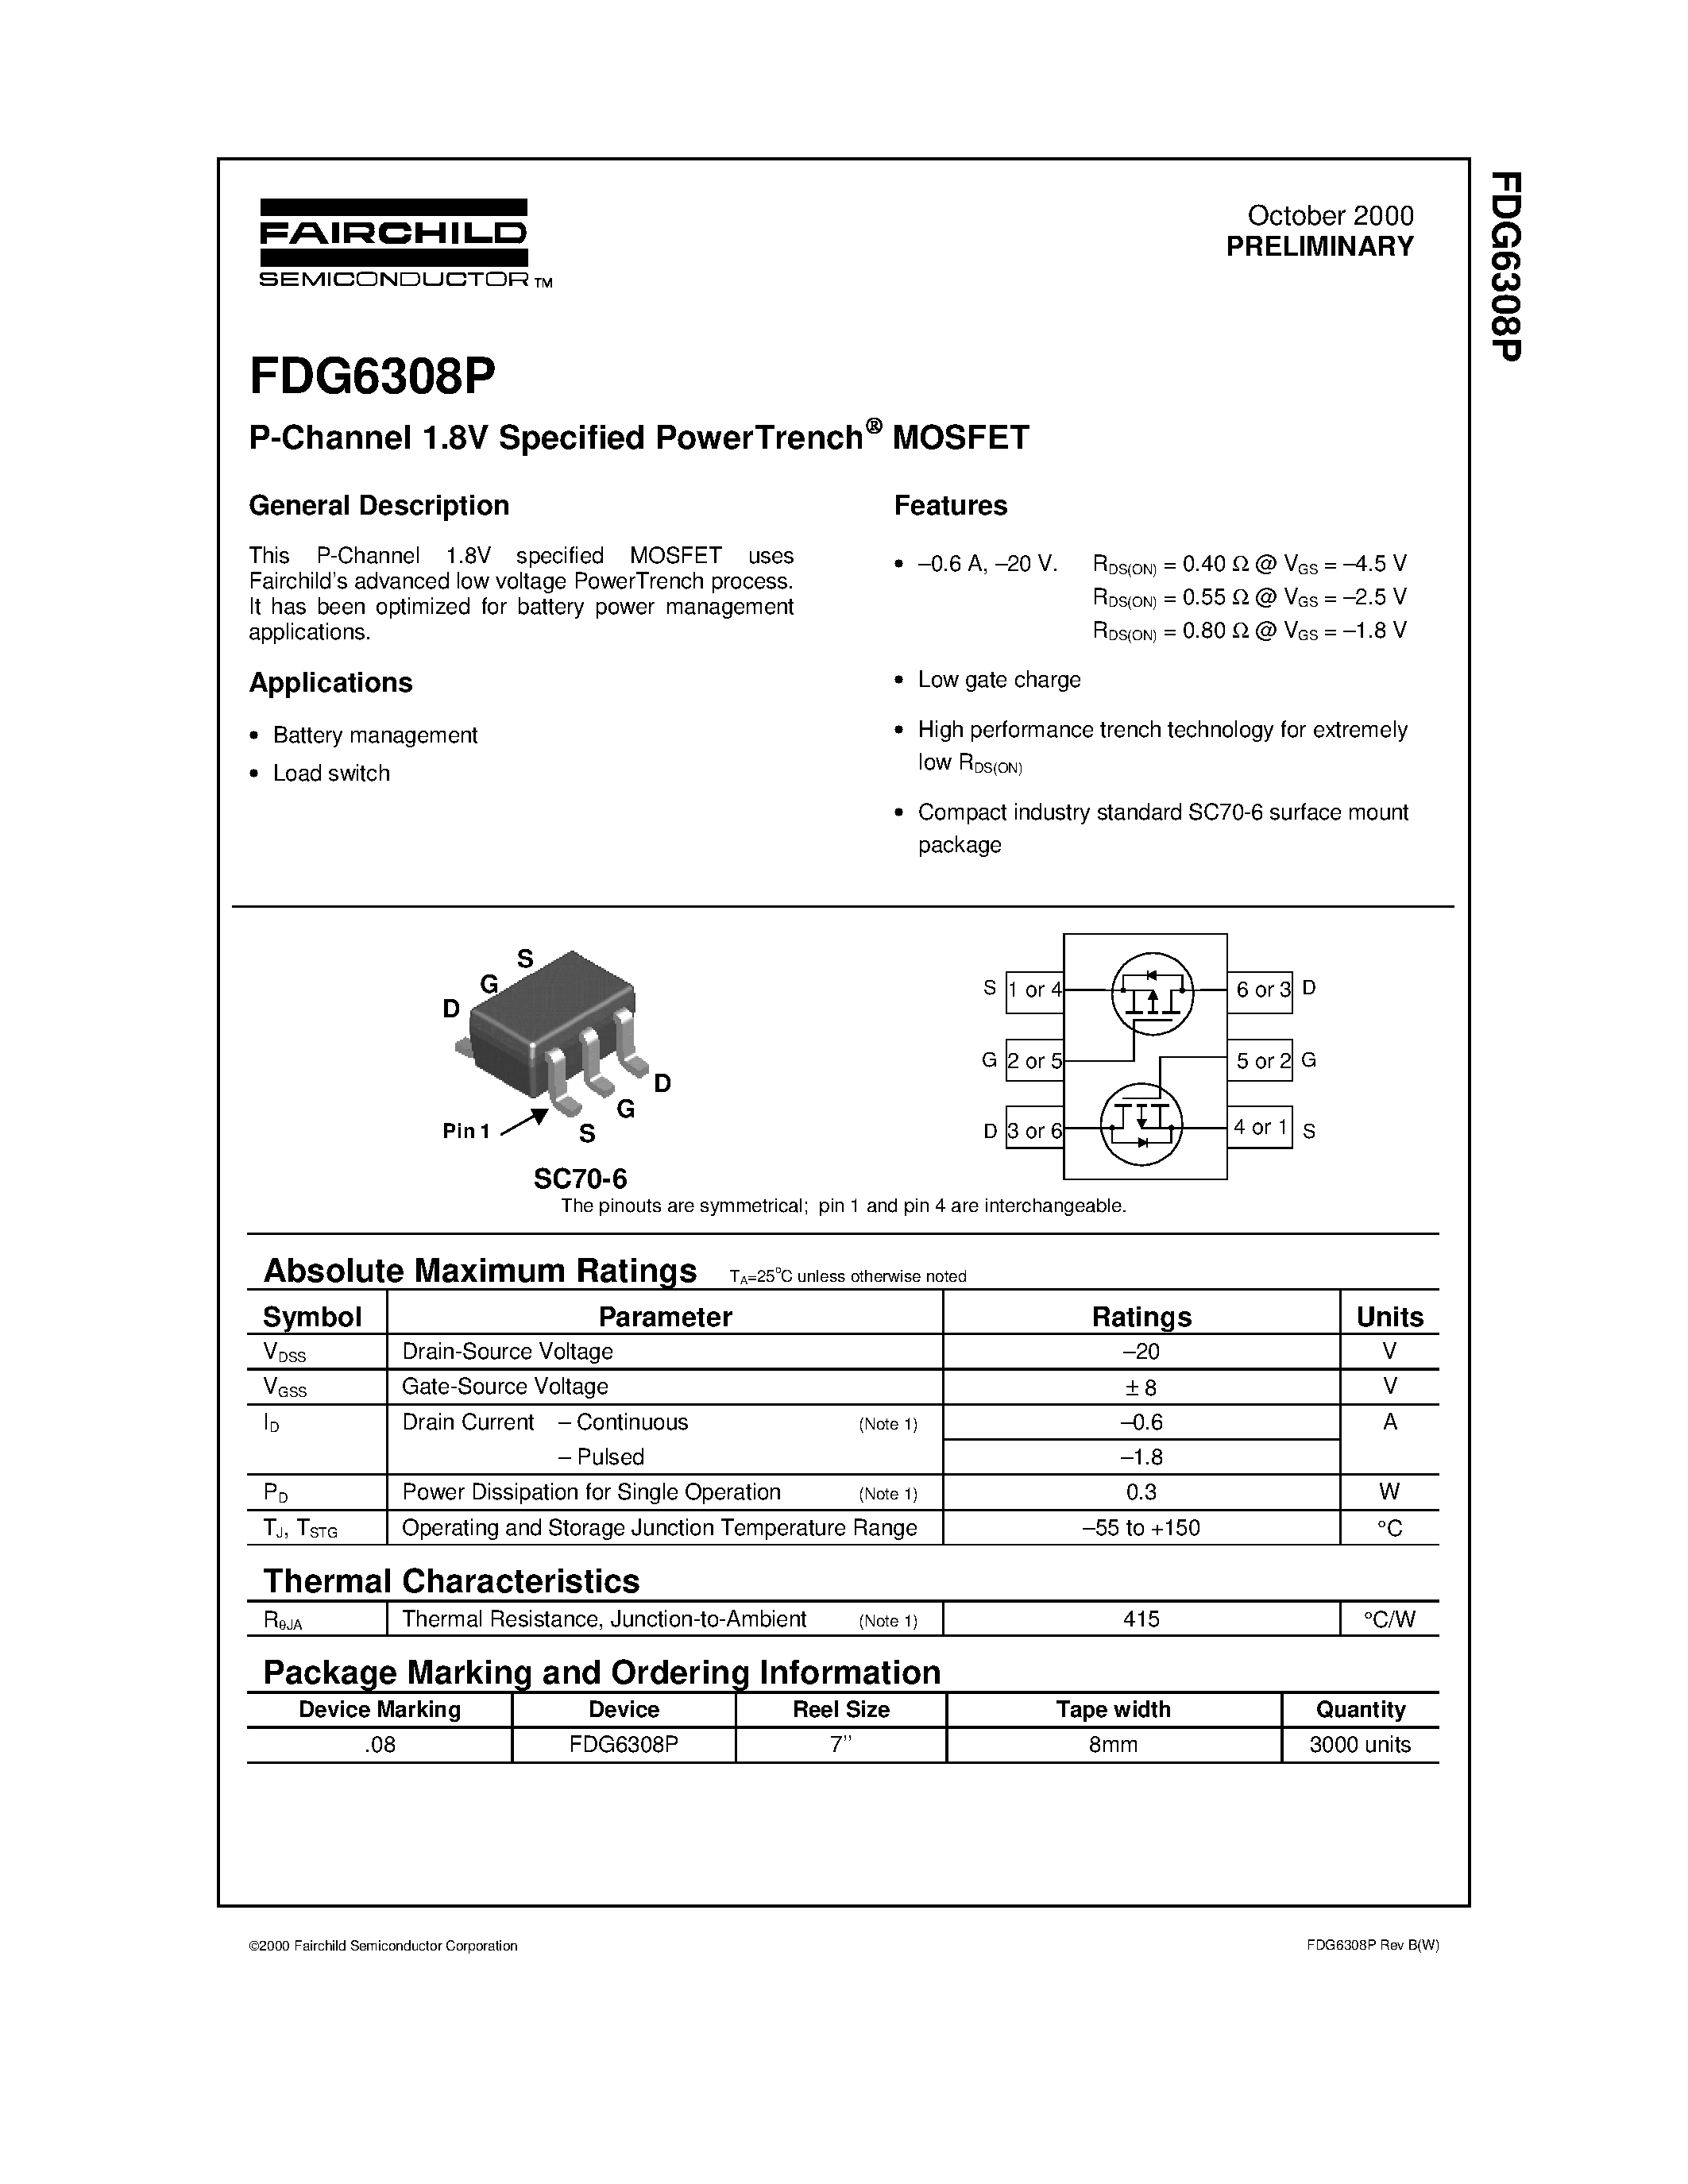 Даташит FDG6308 - P-Channel 1.8V Specified PowerTrench MOSFET страница 1